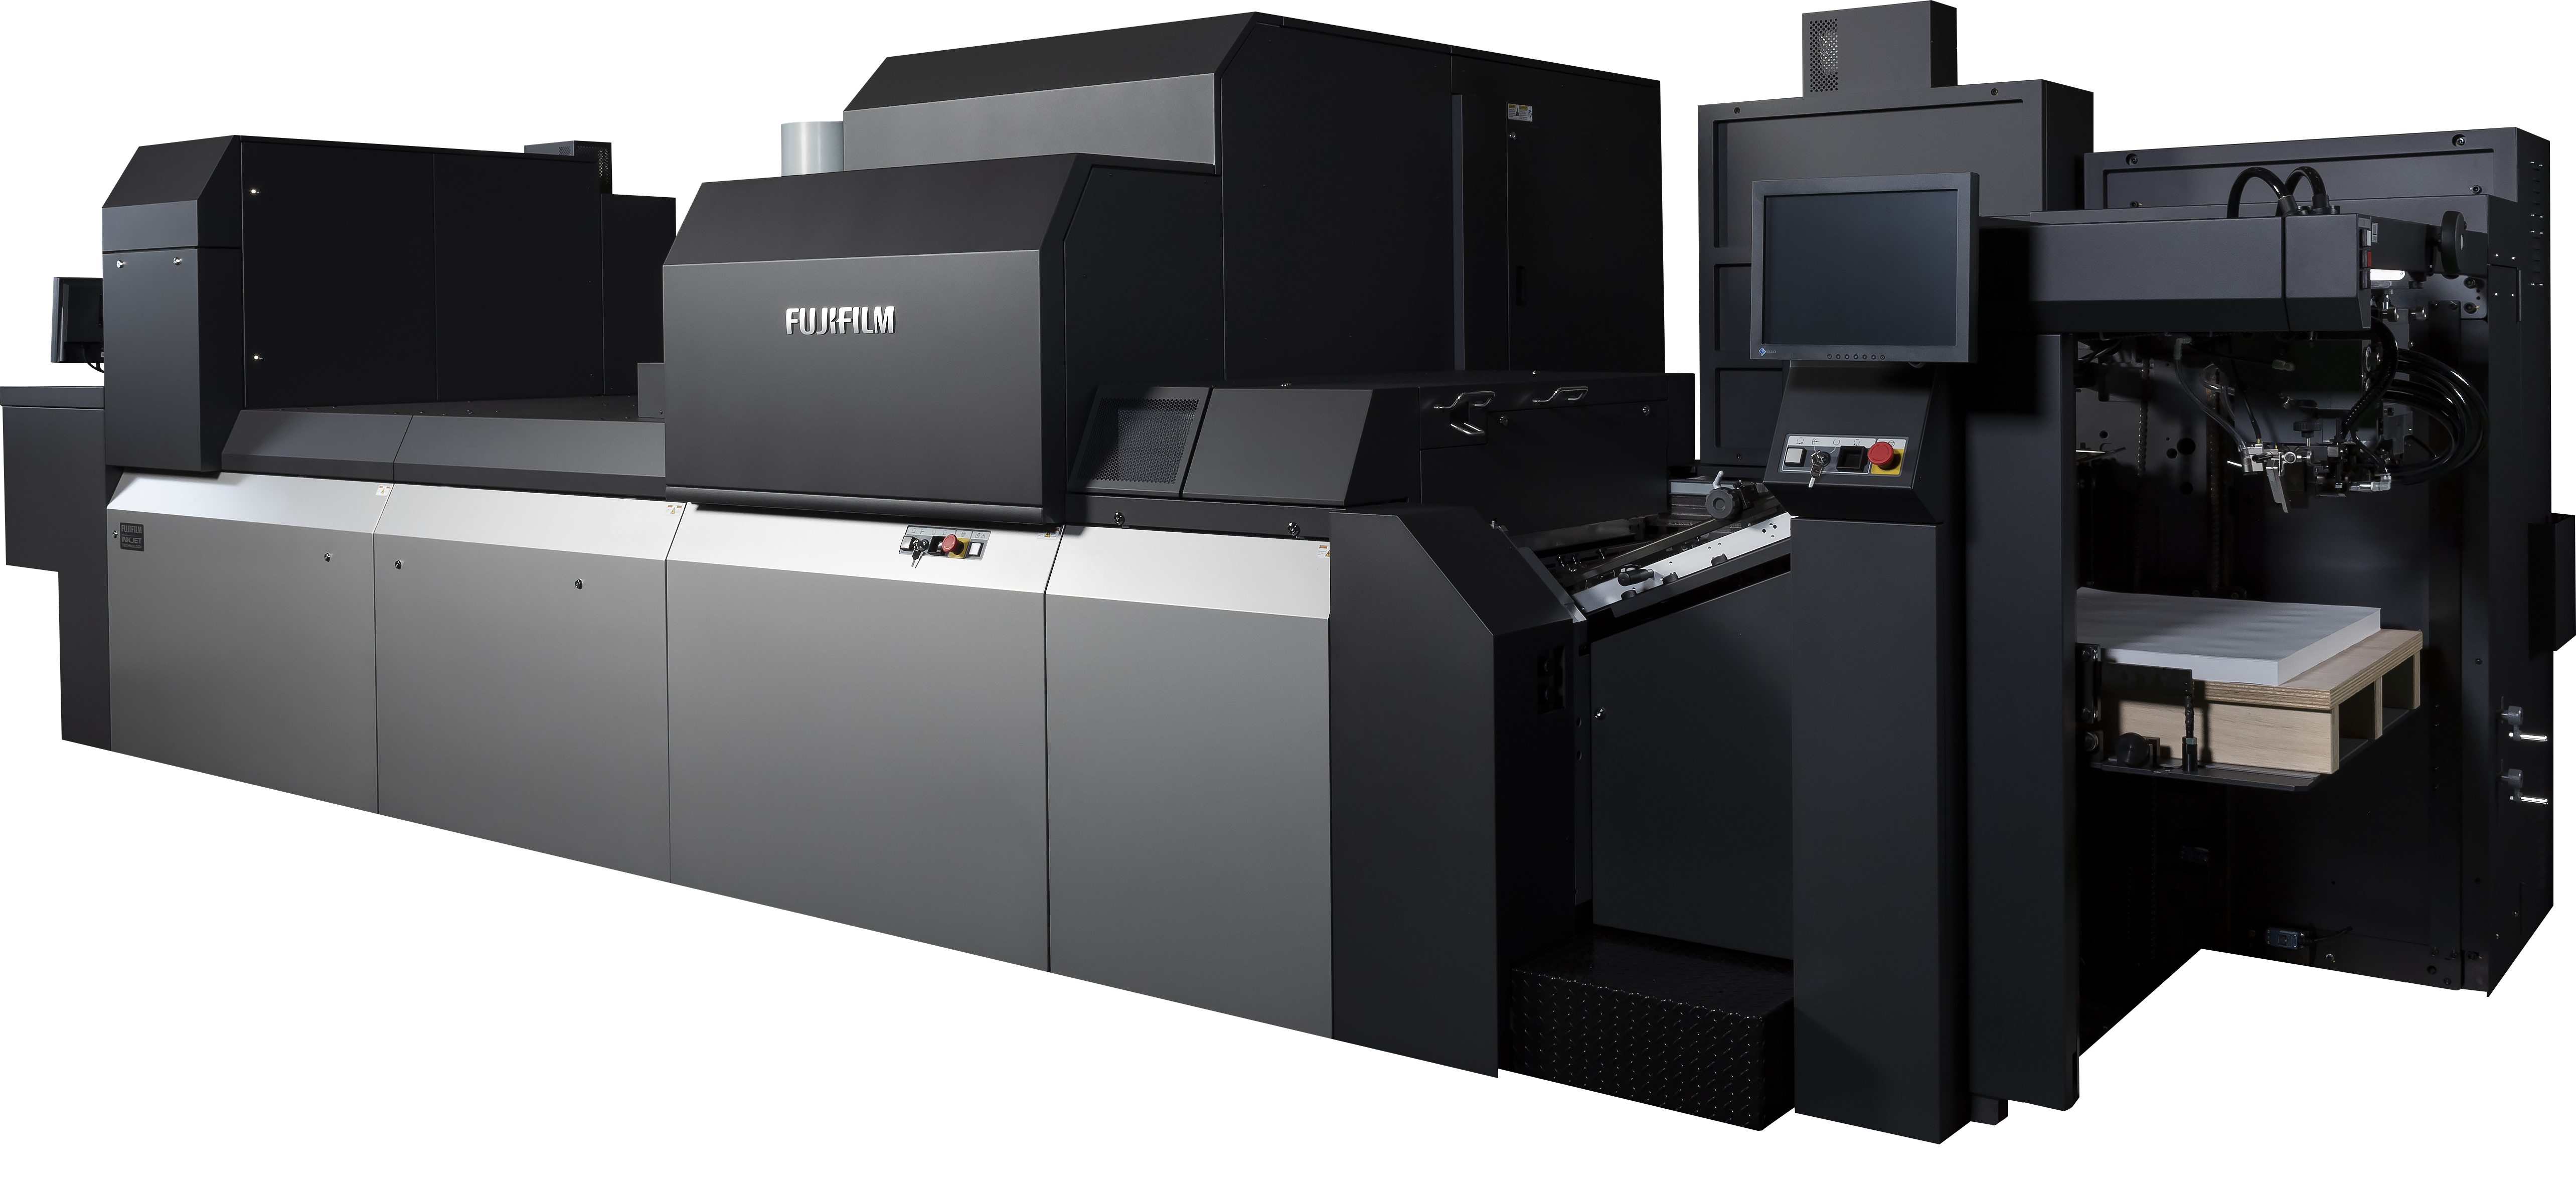 Featured image for “Fujifilm’s J Press 750S Achieves ISO/PAS 15339 System Certification and Master Elite Status From Idealliance”